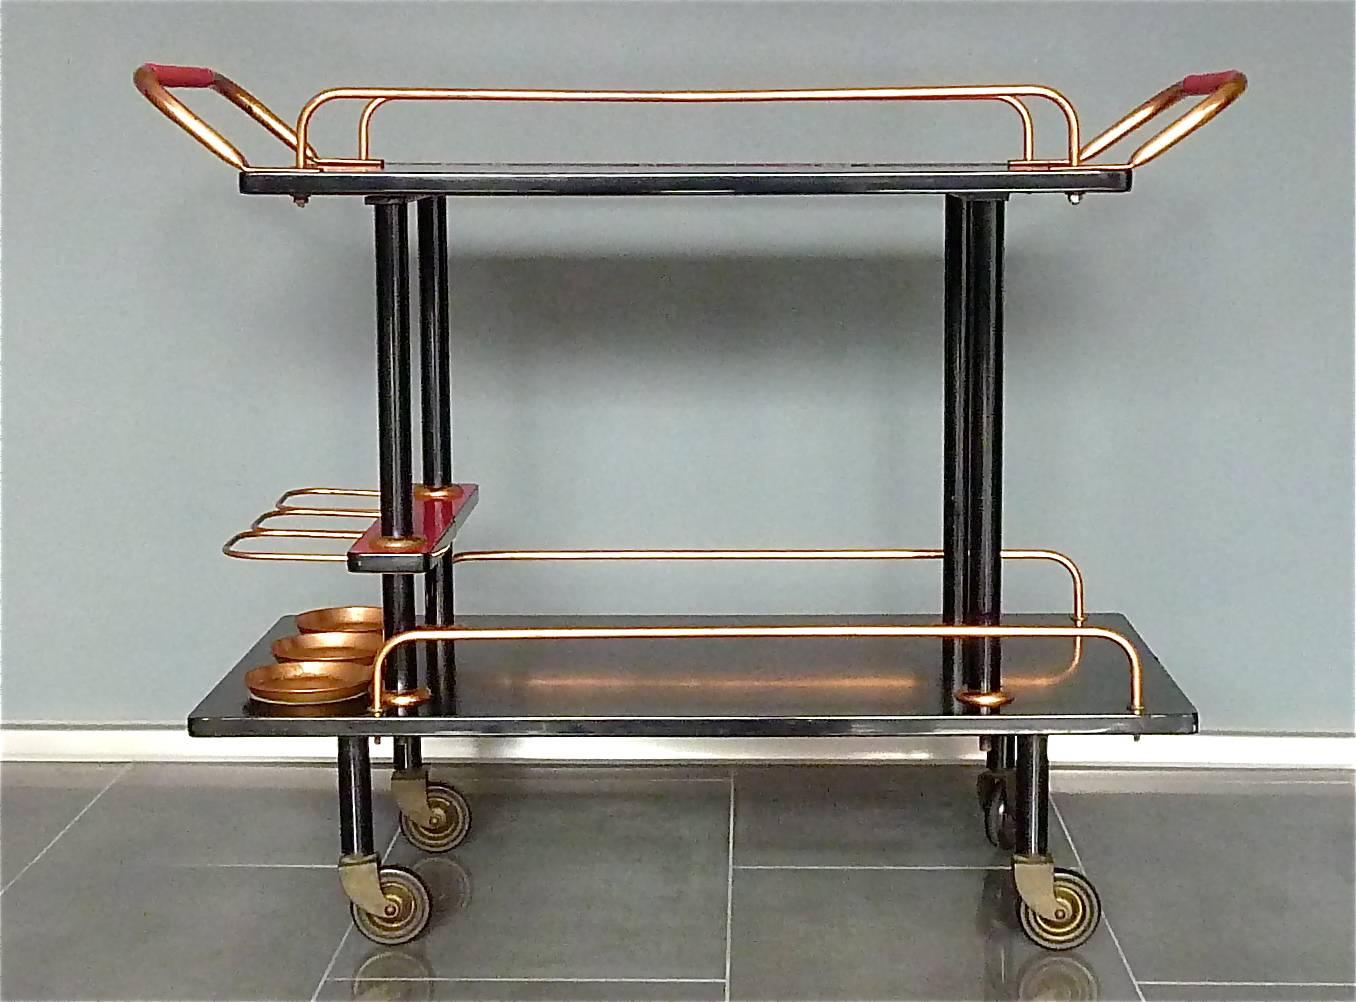 A rare and unique Bauhaus vintage bar cart or serving trolley with black painted wood, black painted iron, patinated copper details, some kind of red formica foil surface and red plastic around handles. Made in Germany, circa 1930s to 1950s in a